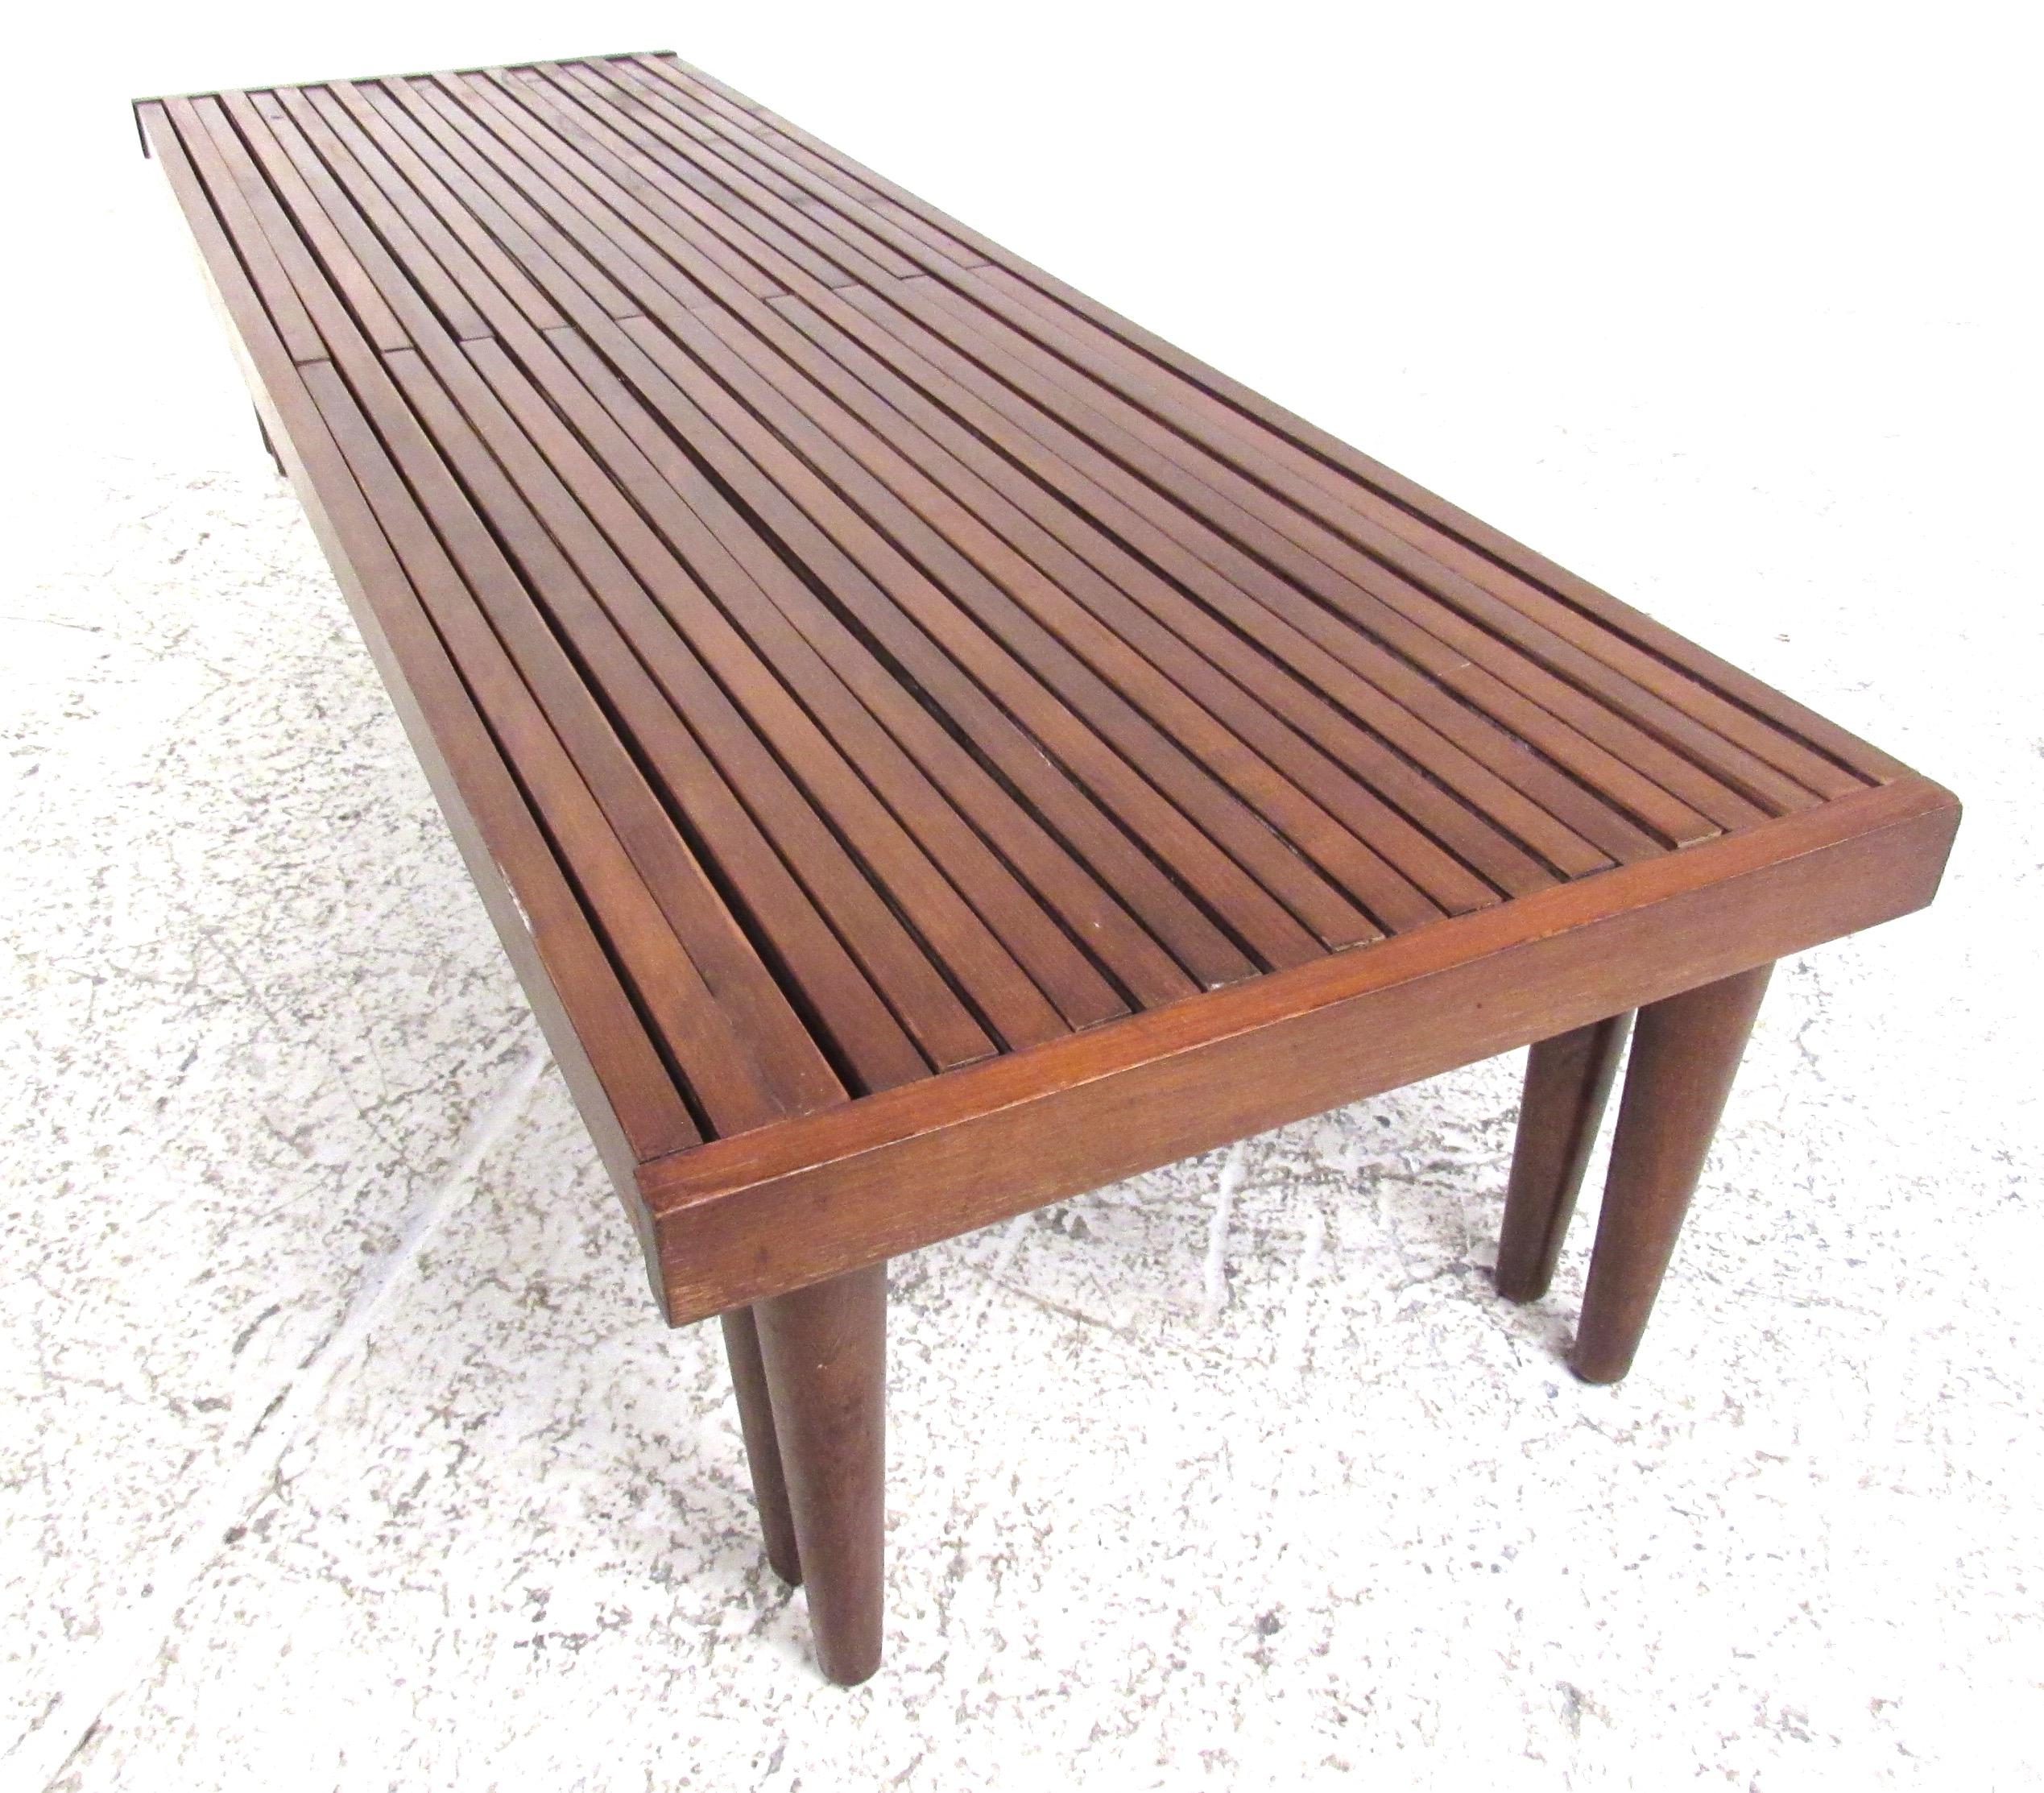 Expandable Mid-Century Modern slat bench in mahogany by Brown-Saltman. Well constructed with vintage finish, this can be used as a bench, coffee table, or a plant stand. It expands from 56